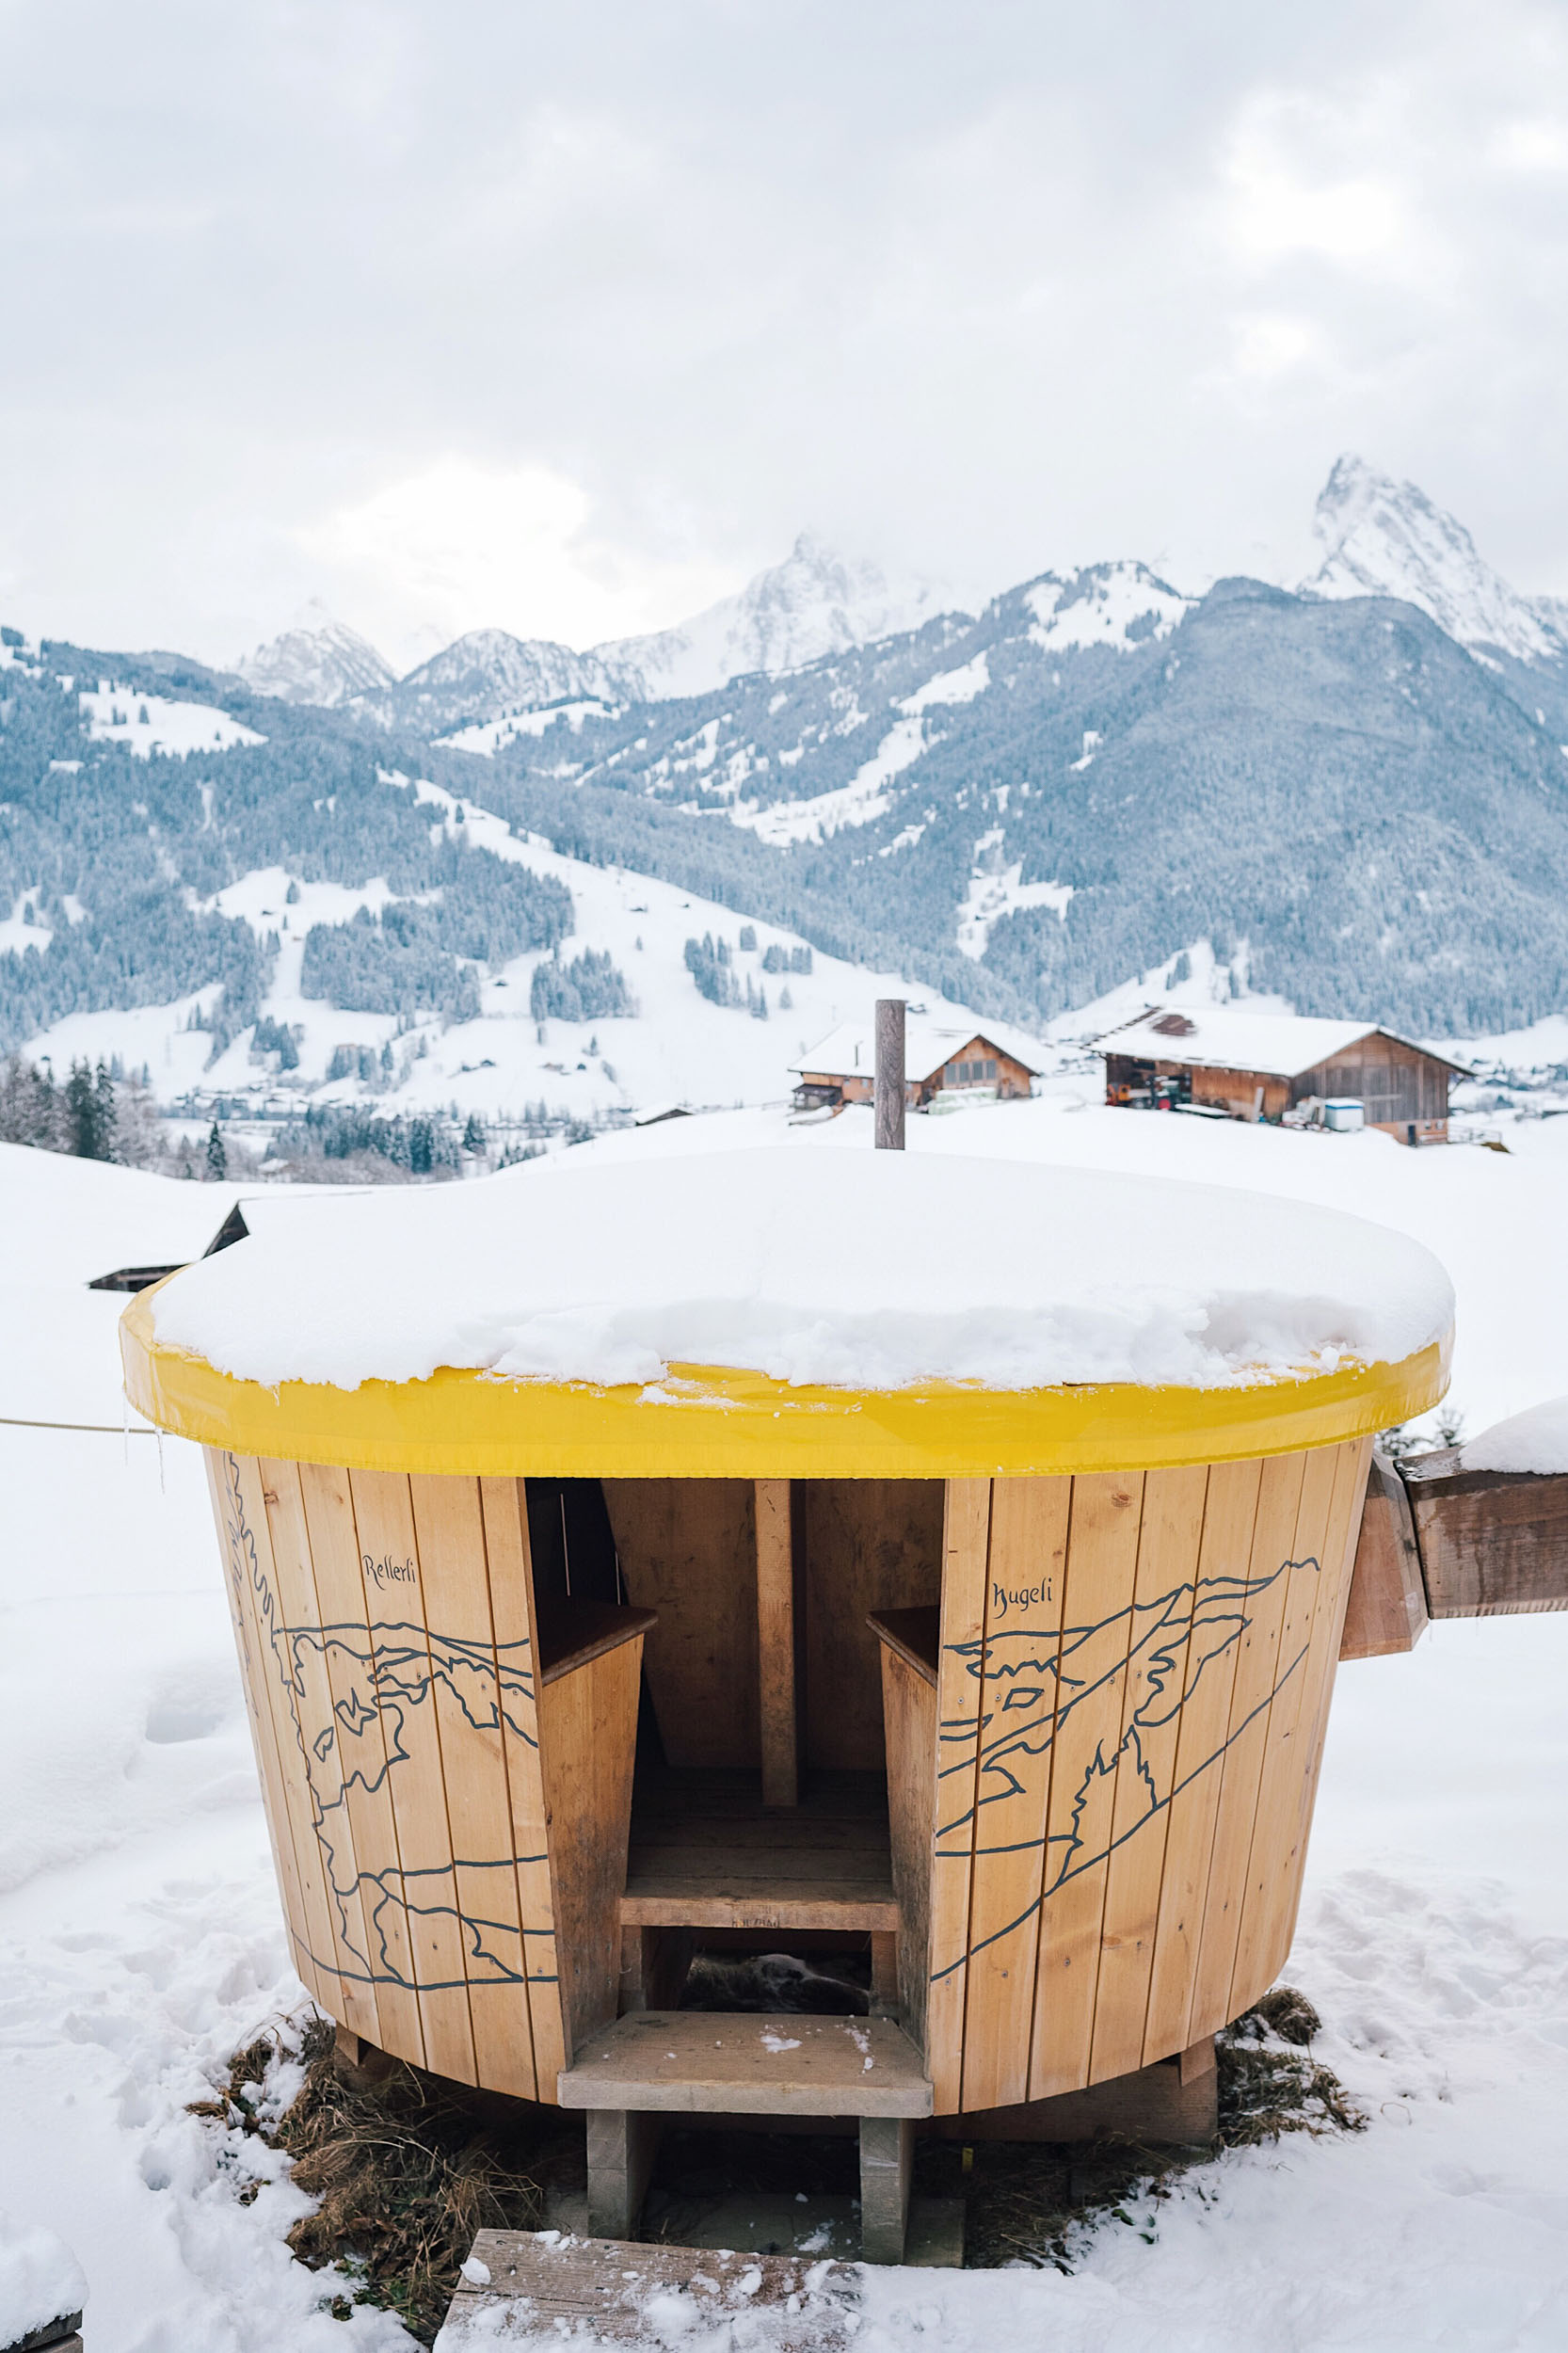 On your fondue hike in Gstaad you will dine inside a large, wooden seating area shaped like, you guessed it, a fondue pot!